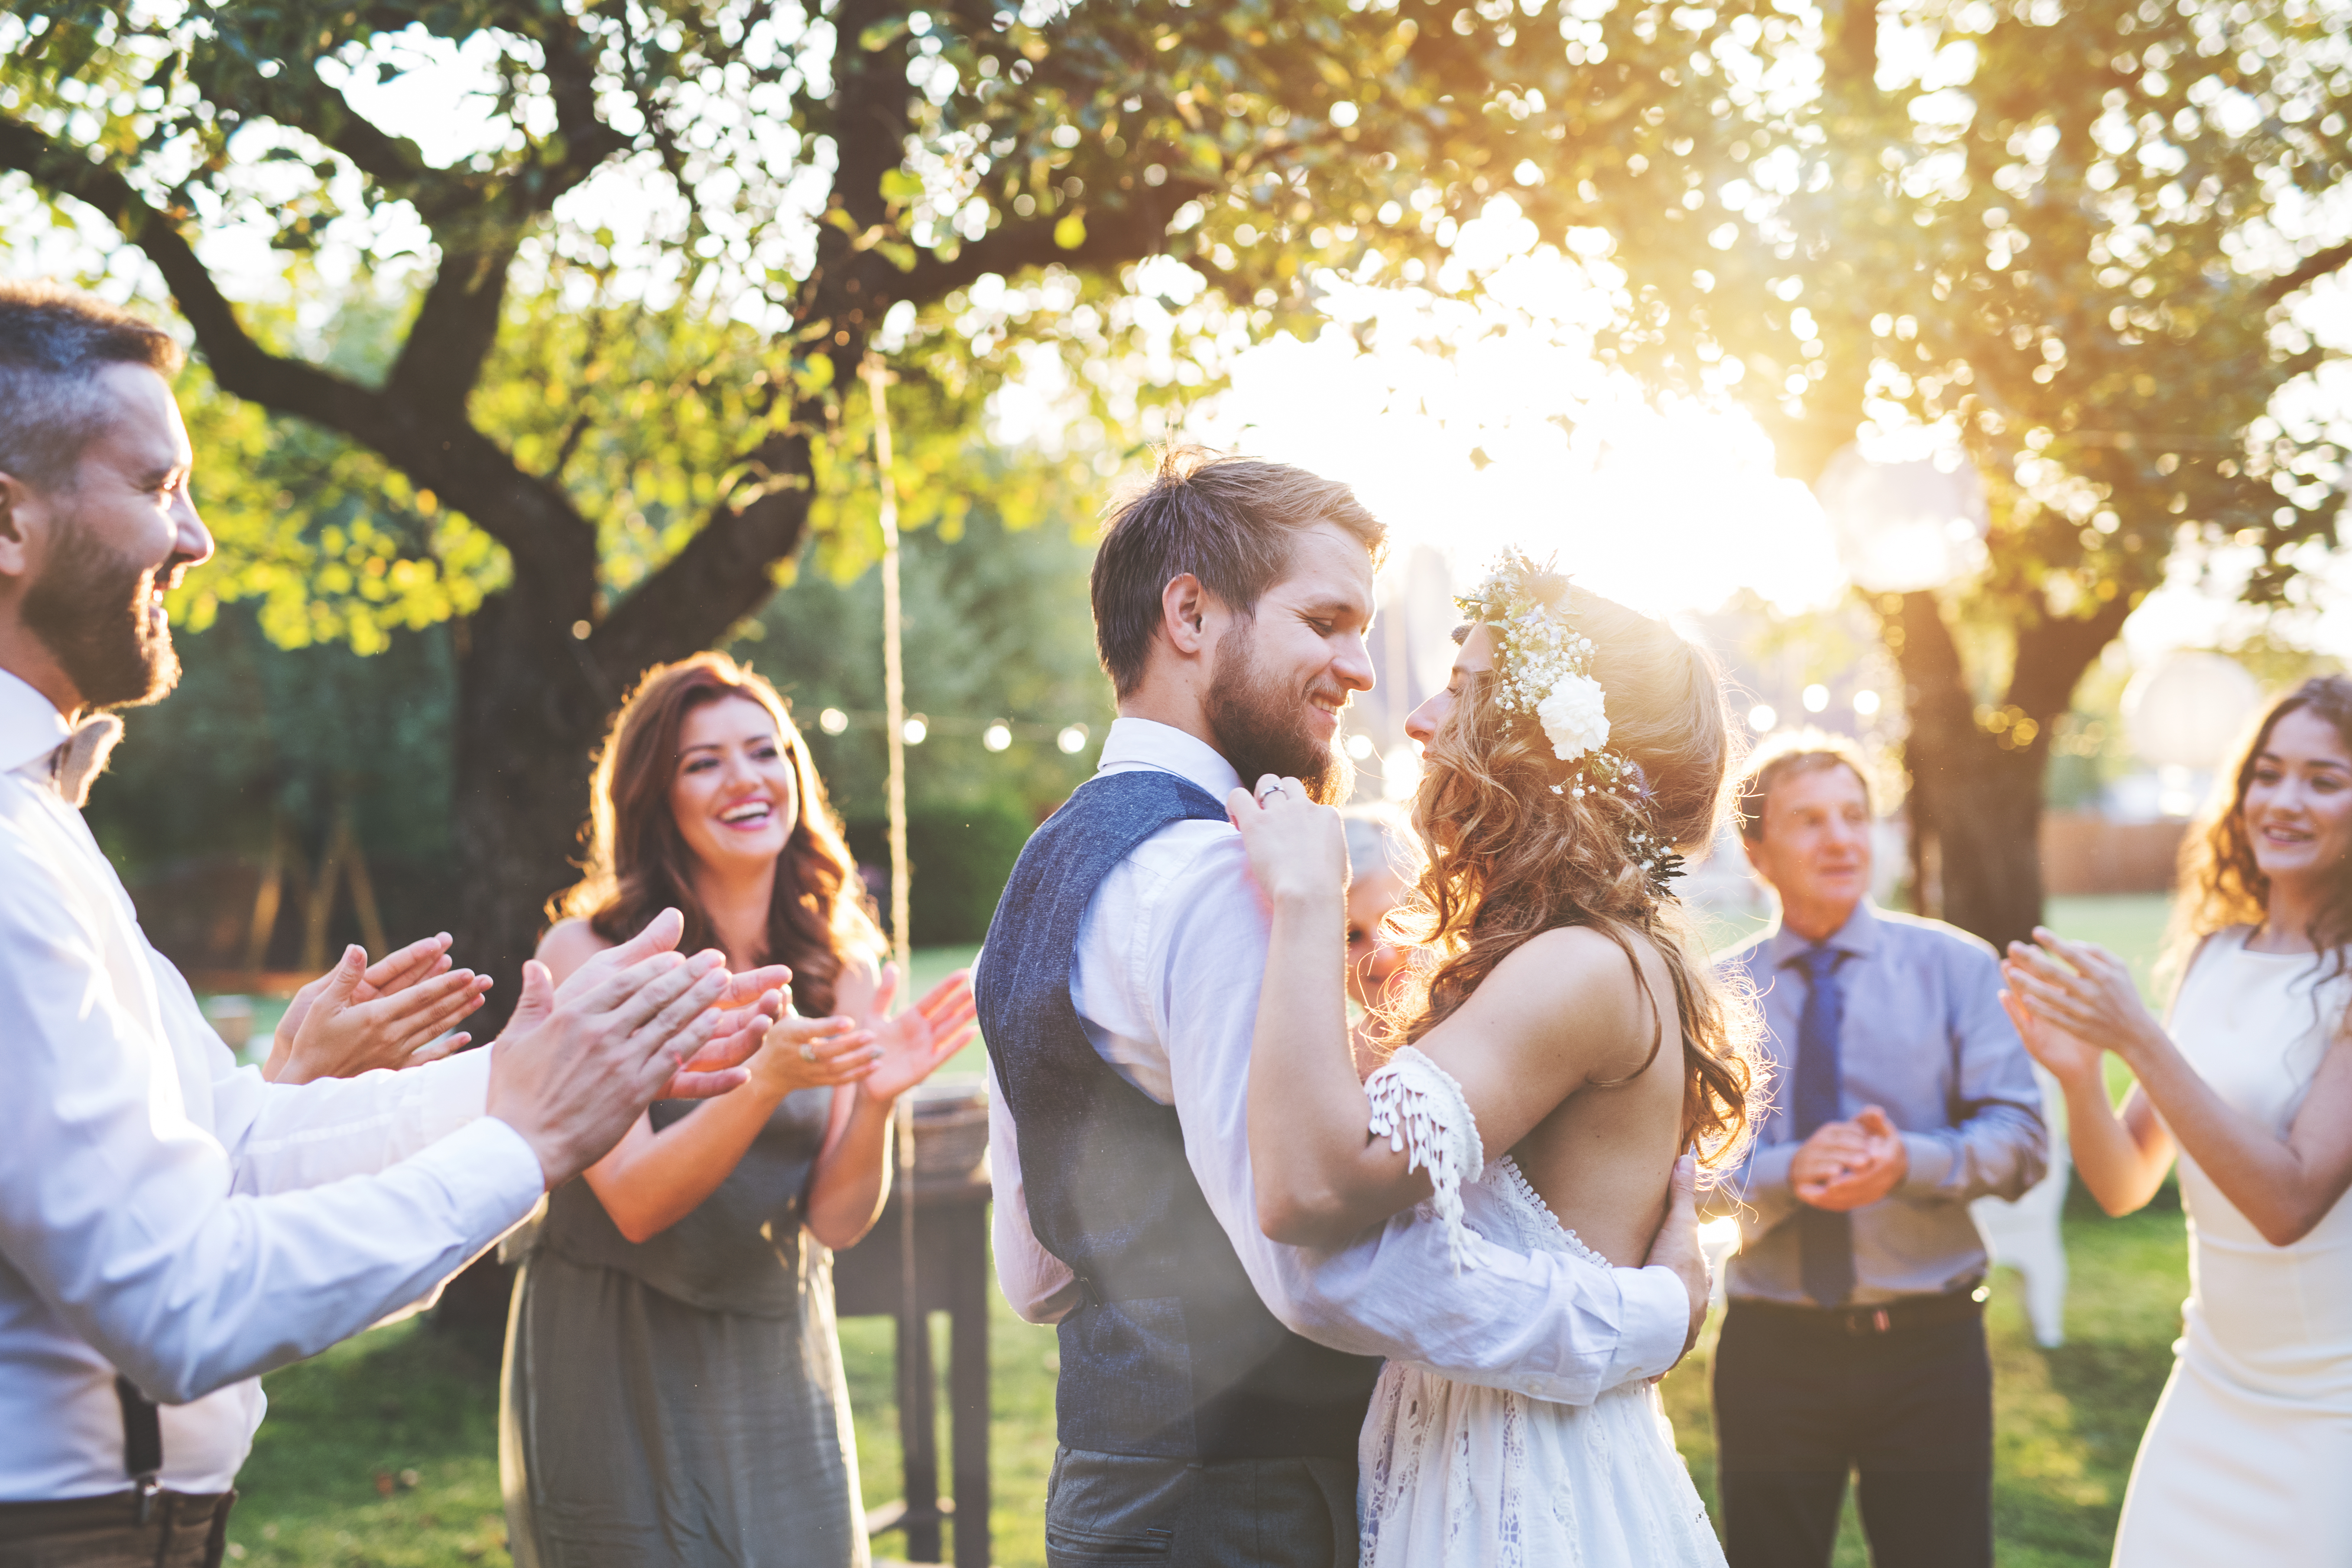 A happy couple surrounded by loved ones. | Source: Shutterstock